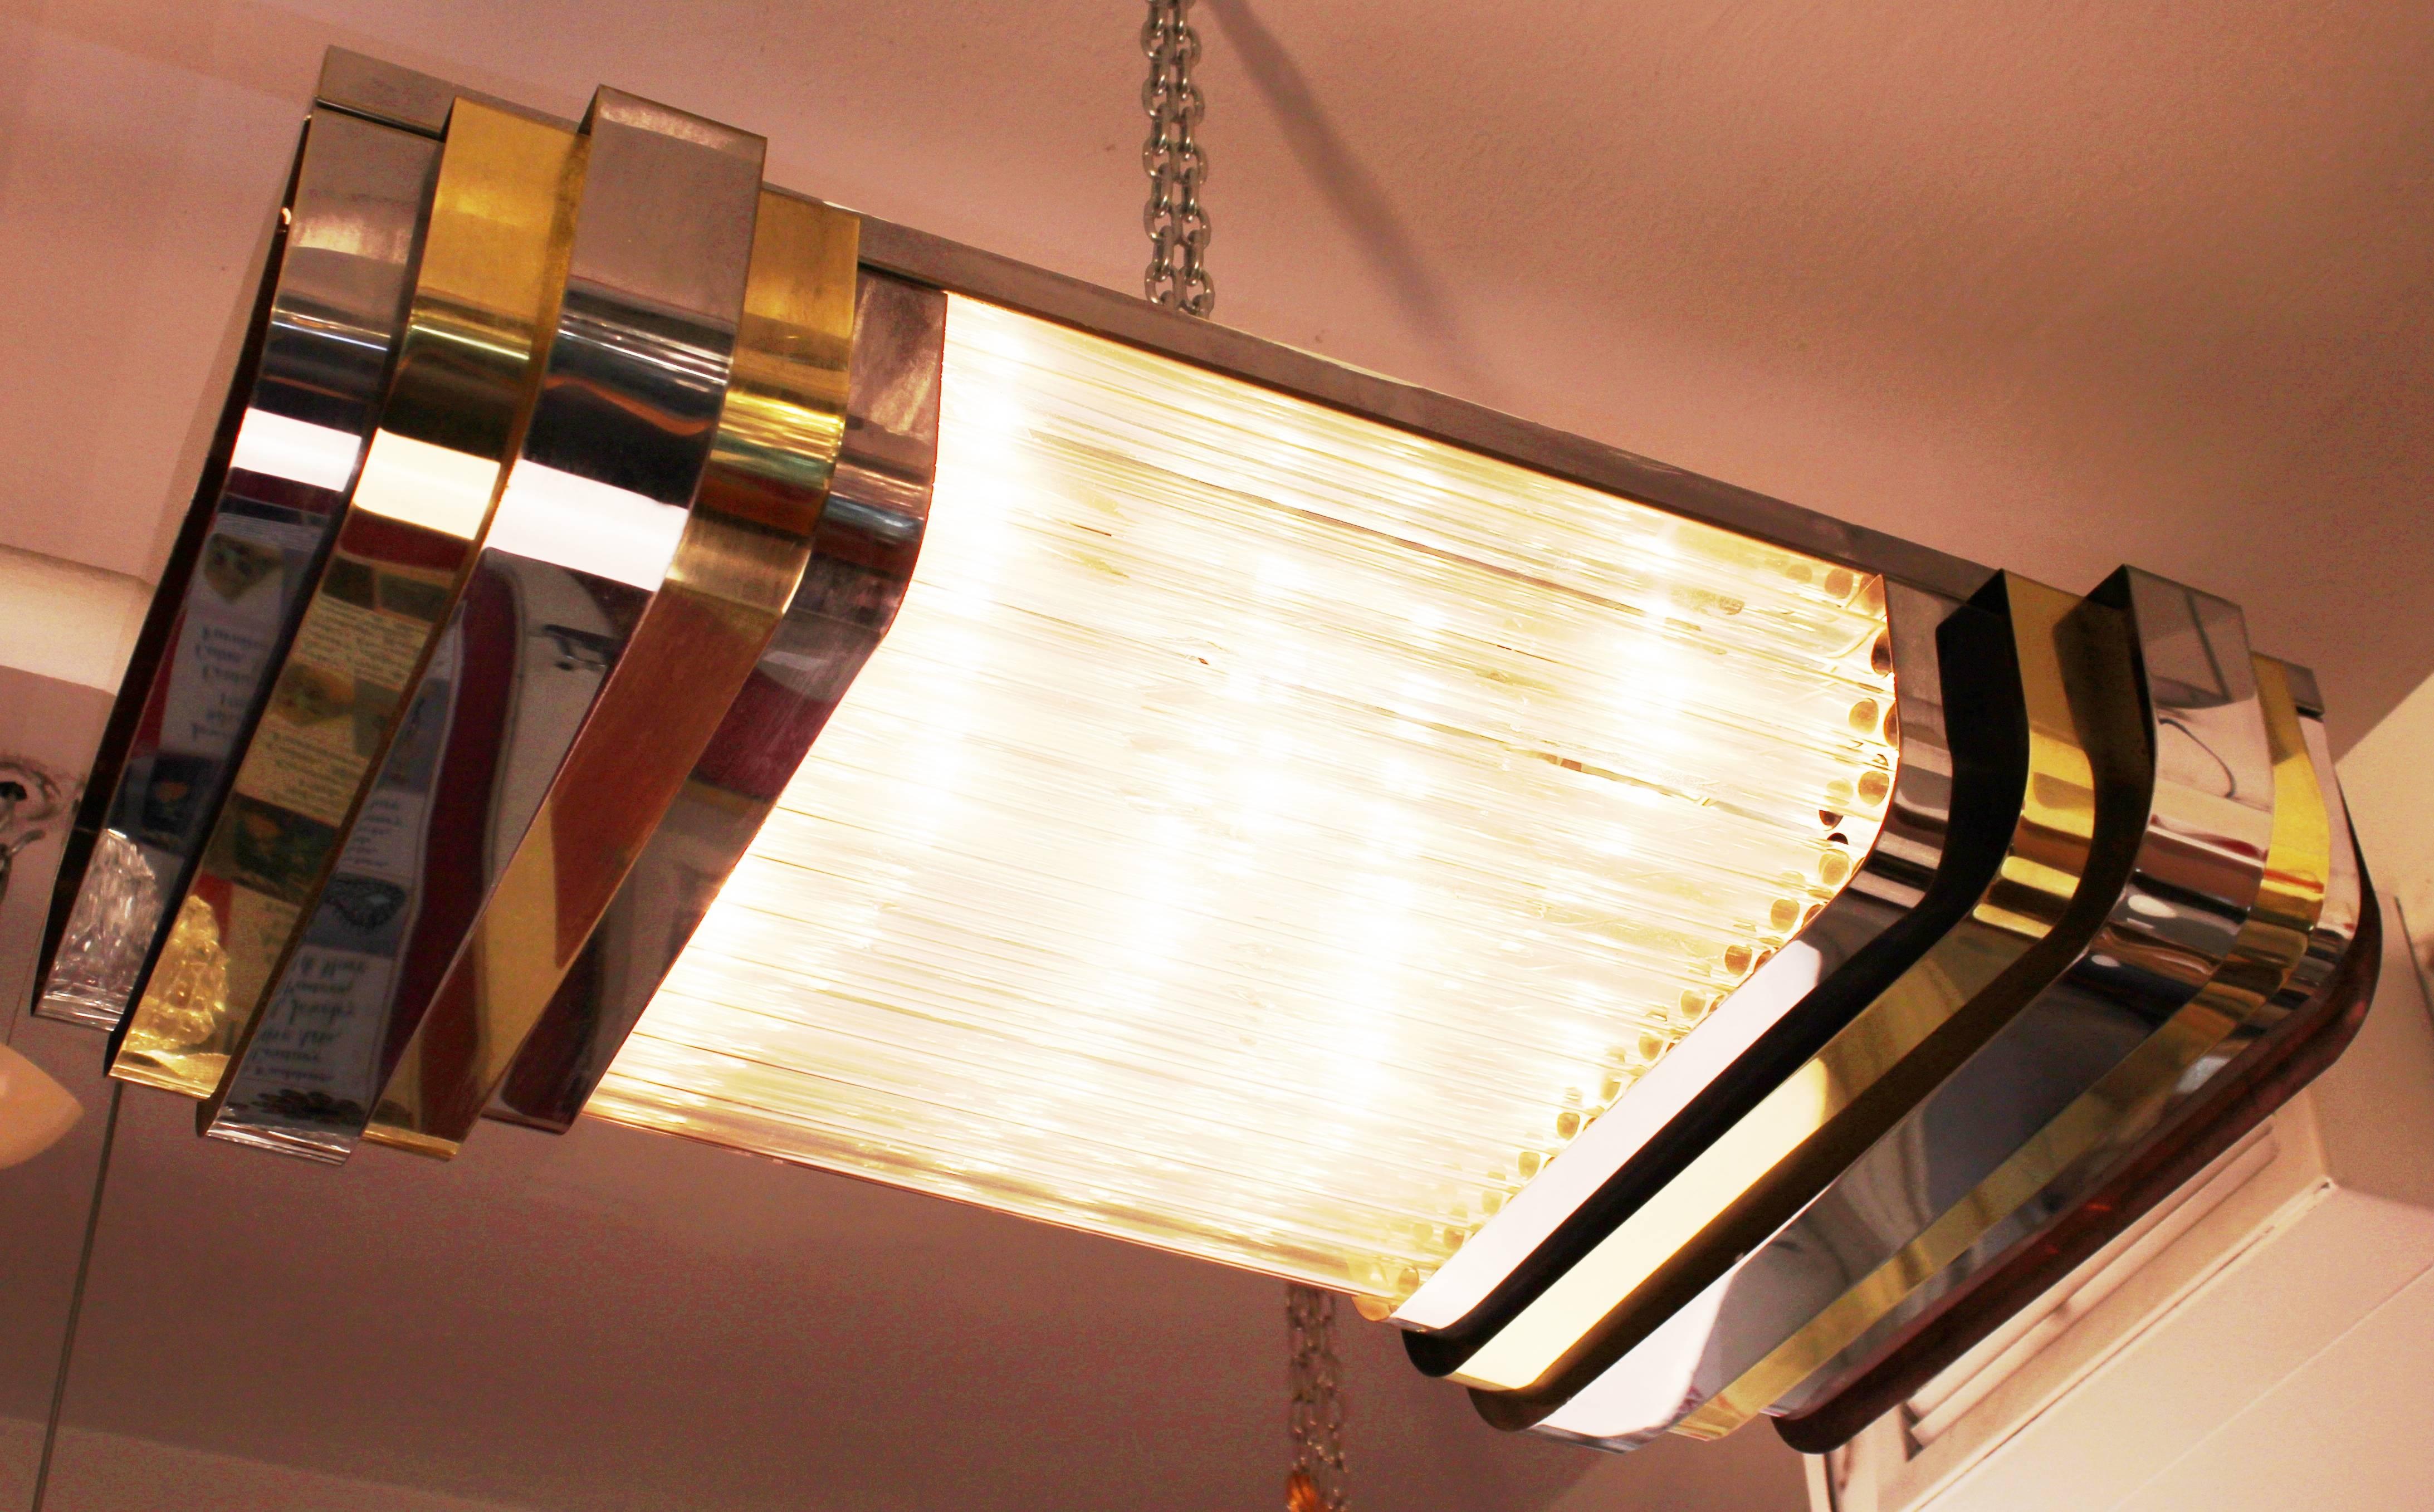 A Mid-Century Modern light fixture in Art Deco style, that can be mounted either on a wall or ceiling. The piece is in great vintage condition with age-appropriate wear.